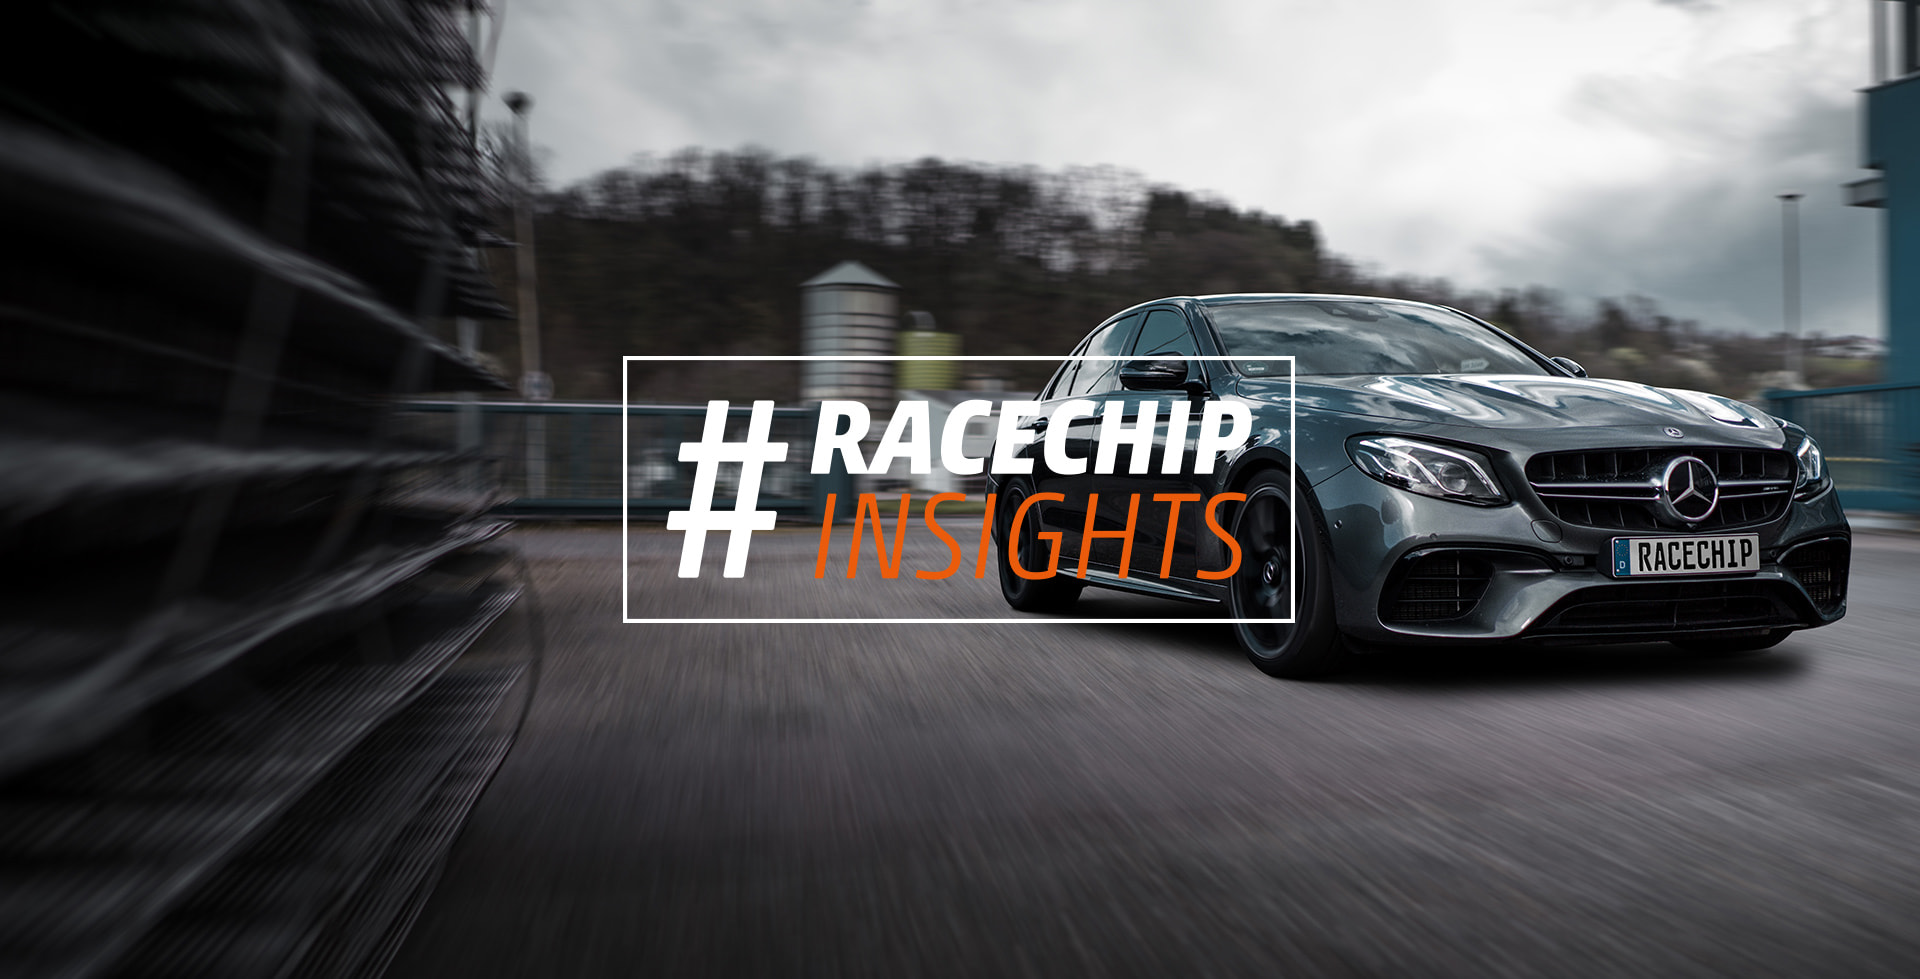 New RaceChip show car: a compact sports car with racing character